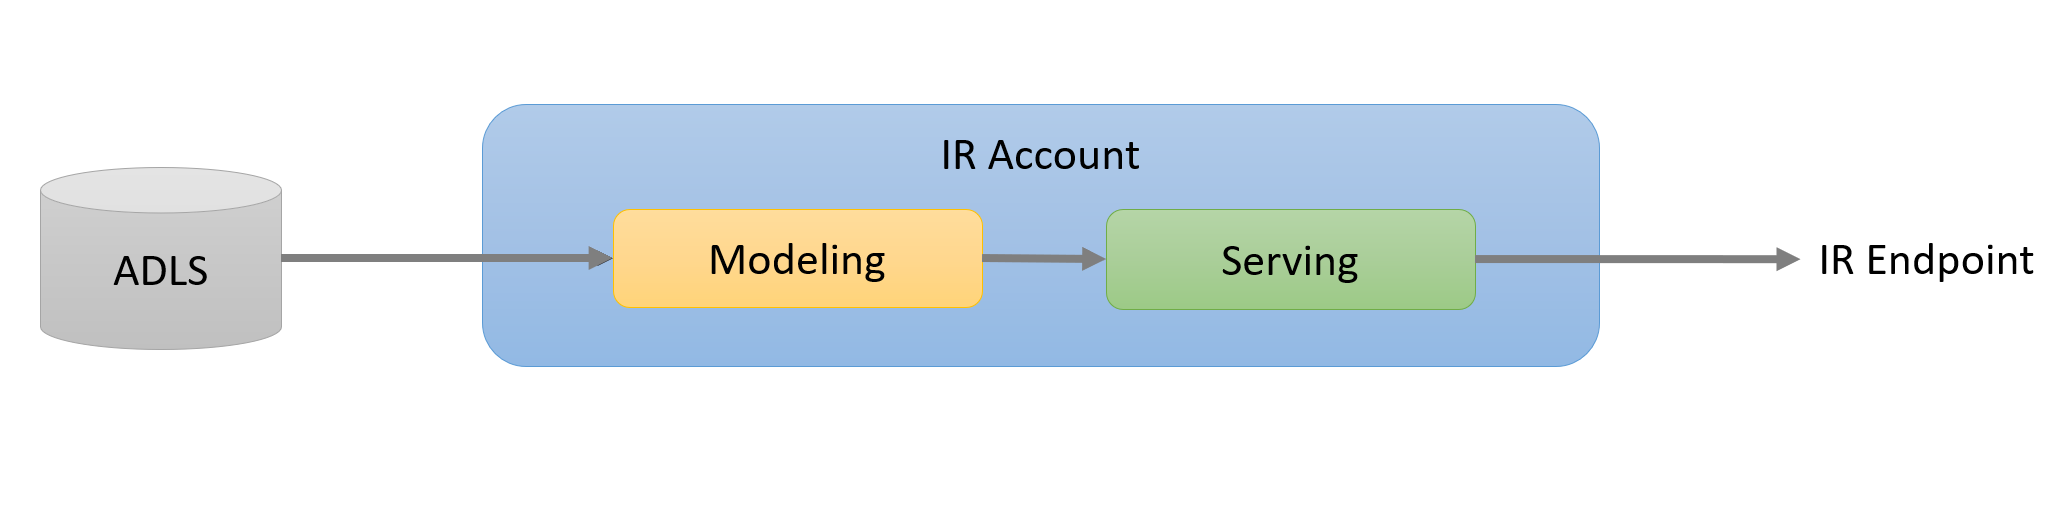 Relationship between Data Lake Storage accounts and the Intelligent Recommendations serving endpoint.